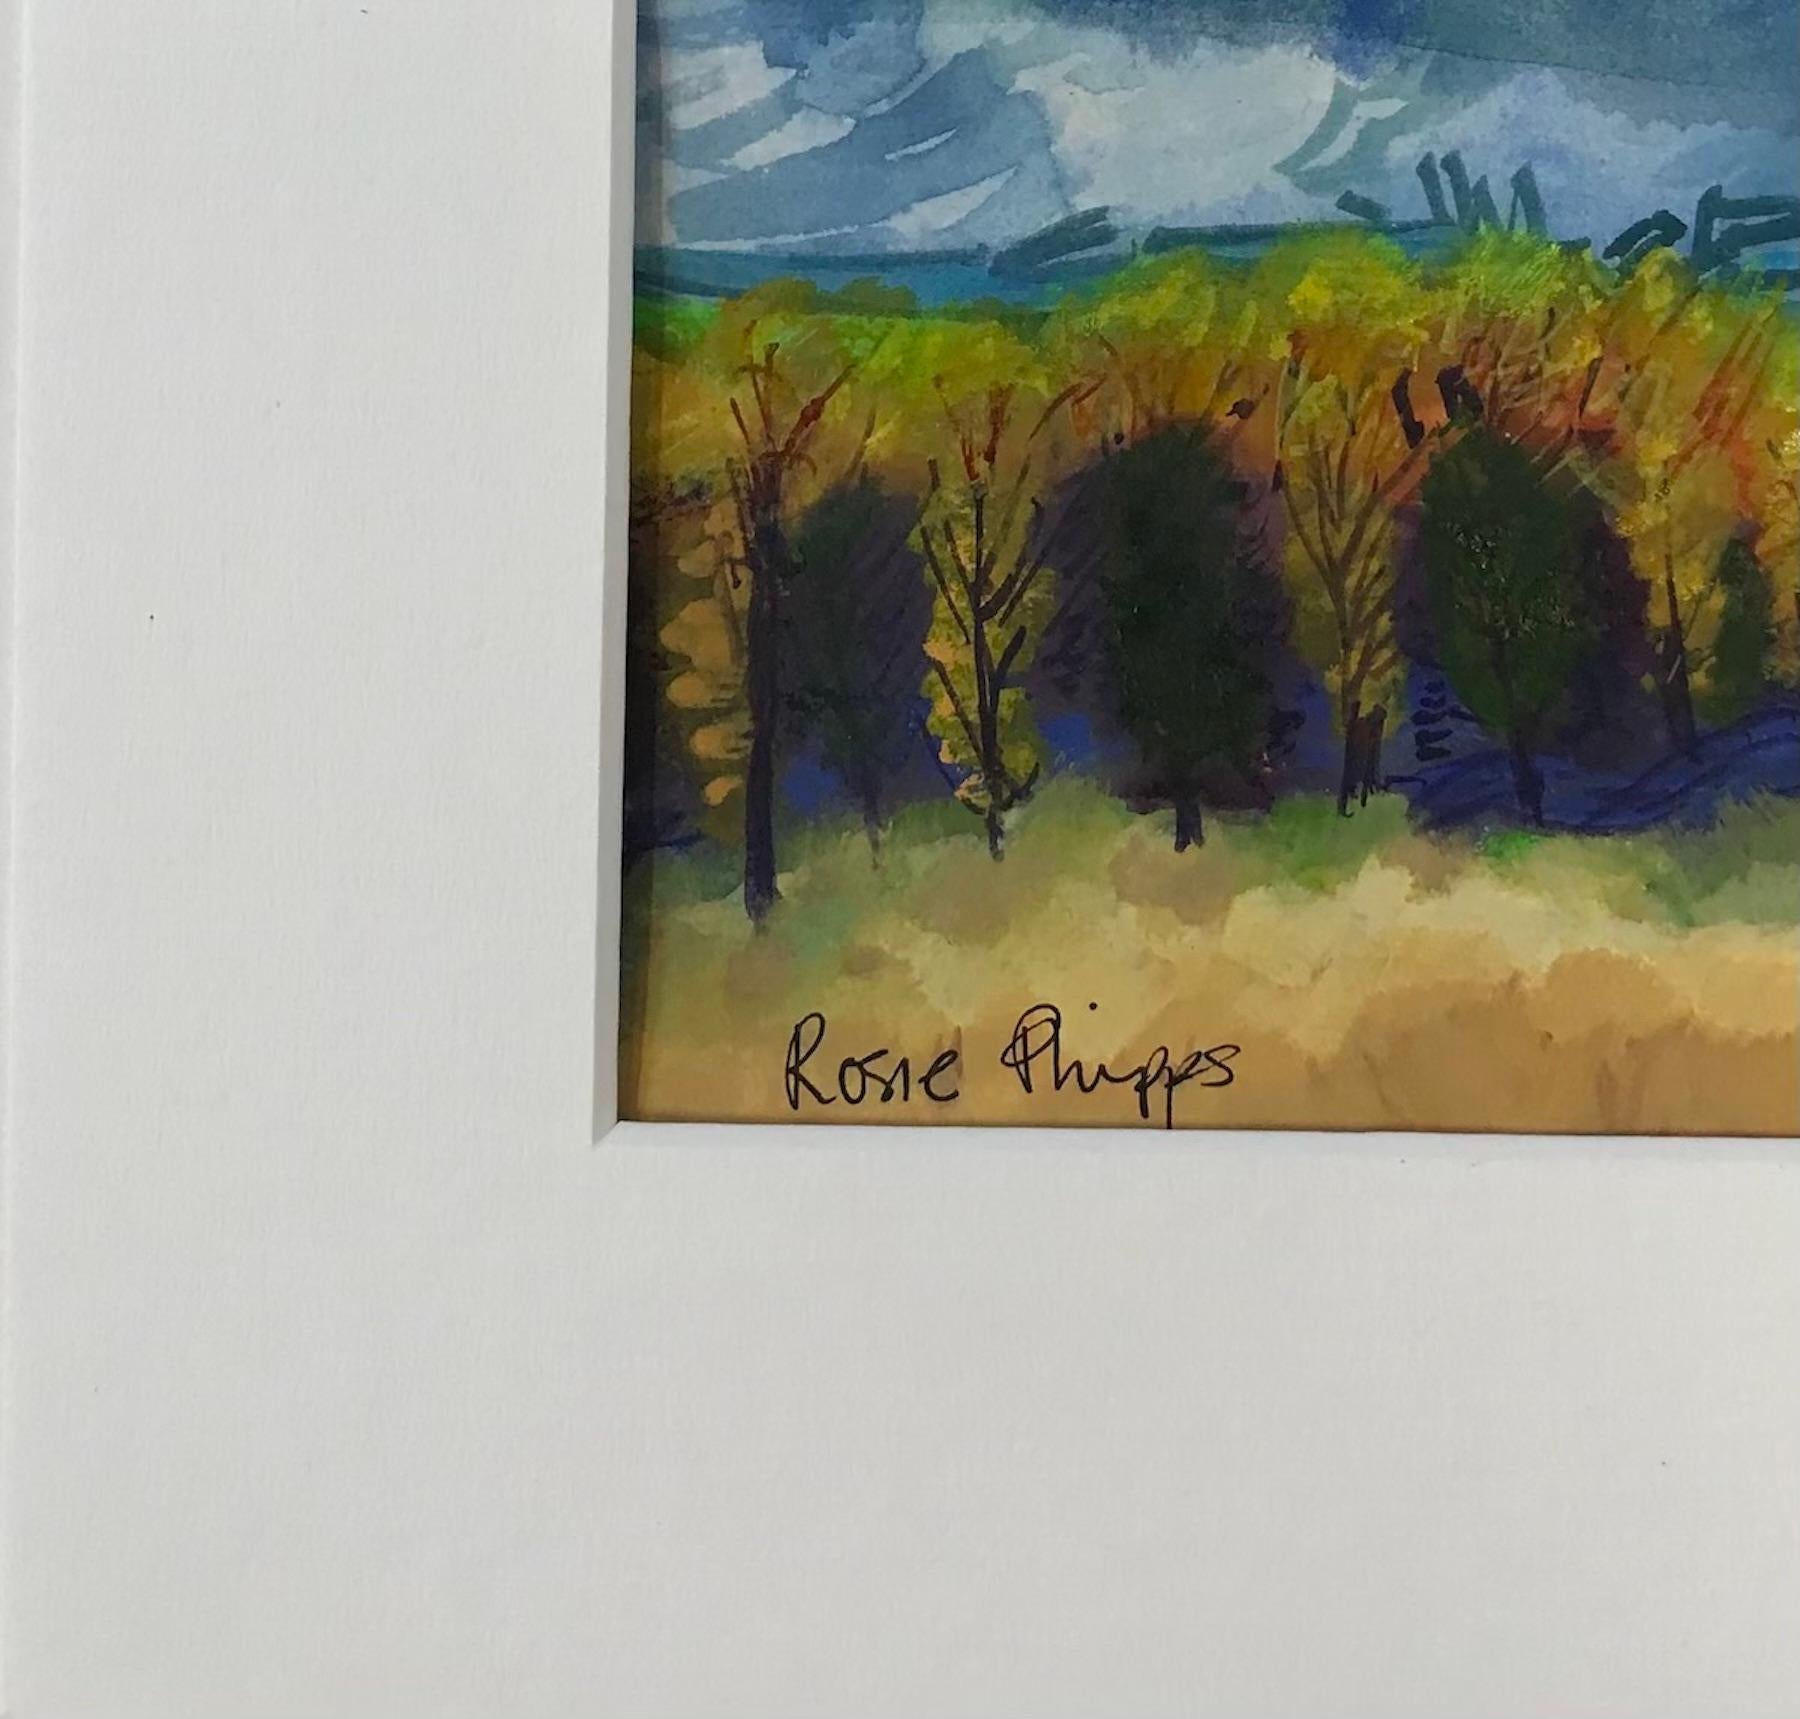 The Bawdy Wind that Kisses all it meets is an original watercolour and gouache painting by artist Rosie Phipps, sold mounted. Featuring her gestural and expressive use of mark making to create these beautifully intimate landscapes.

The Bawdy Wind